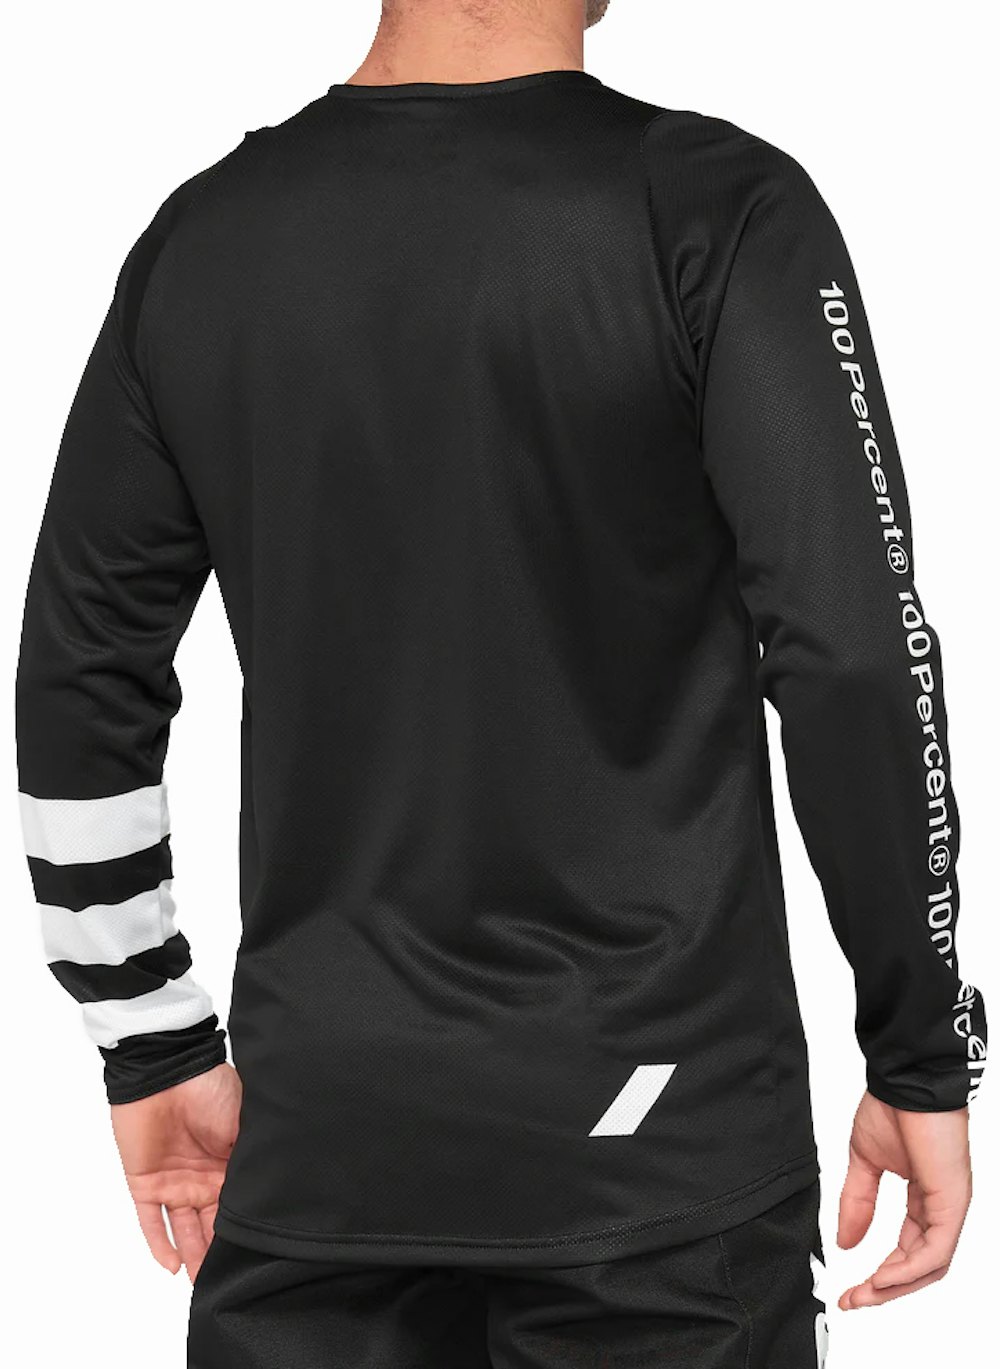 100% R-Core Youth Long Sleeve Jersey